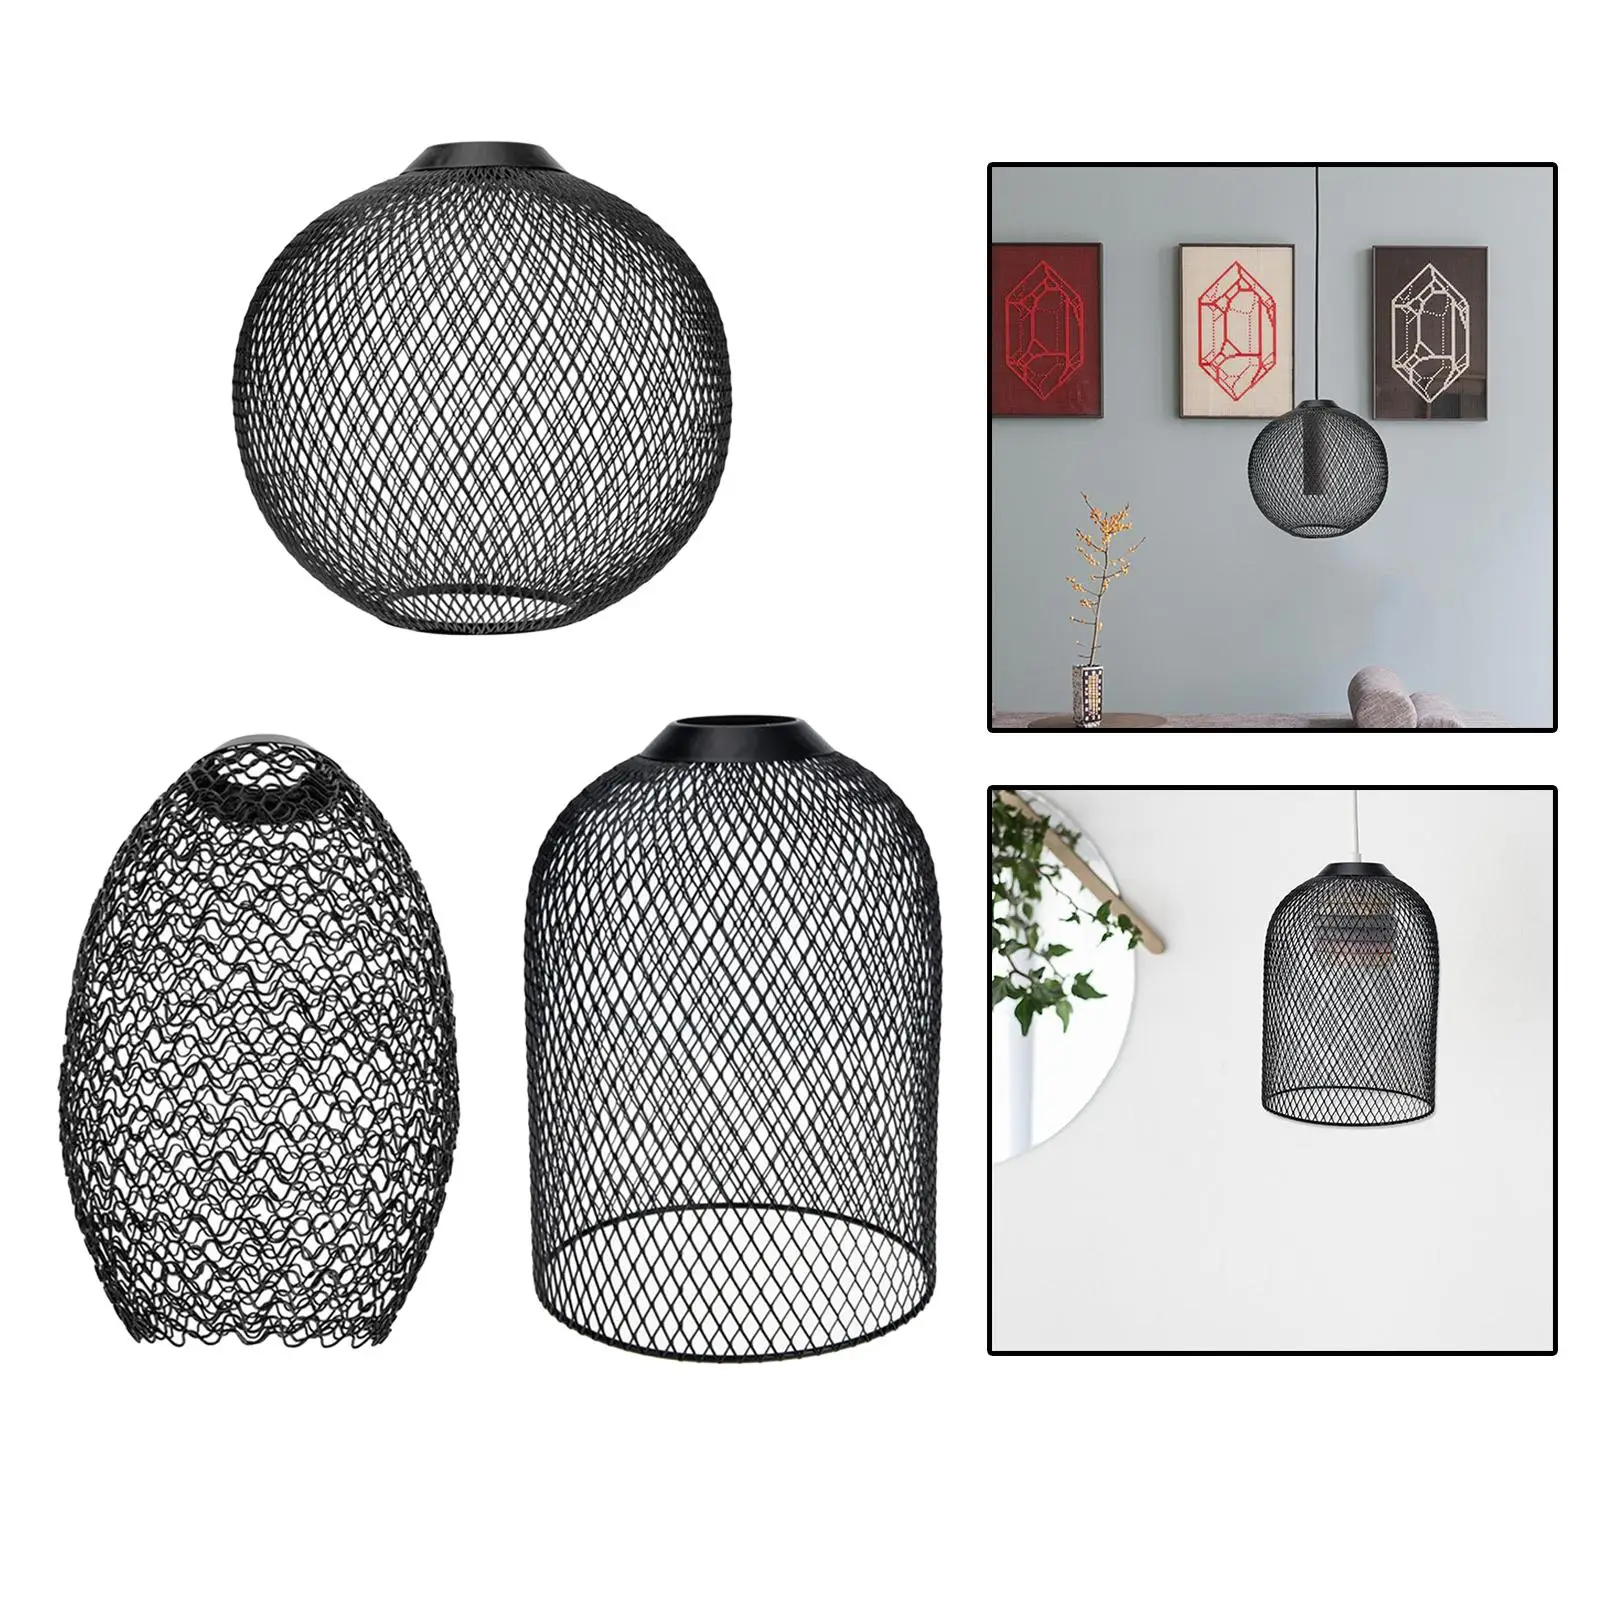 Metal pendant lampshade Wrought iron wire lampshade for coffee shop